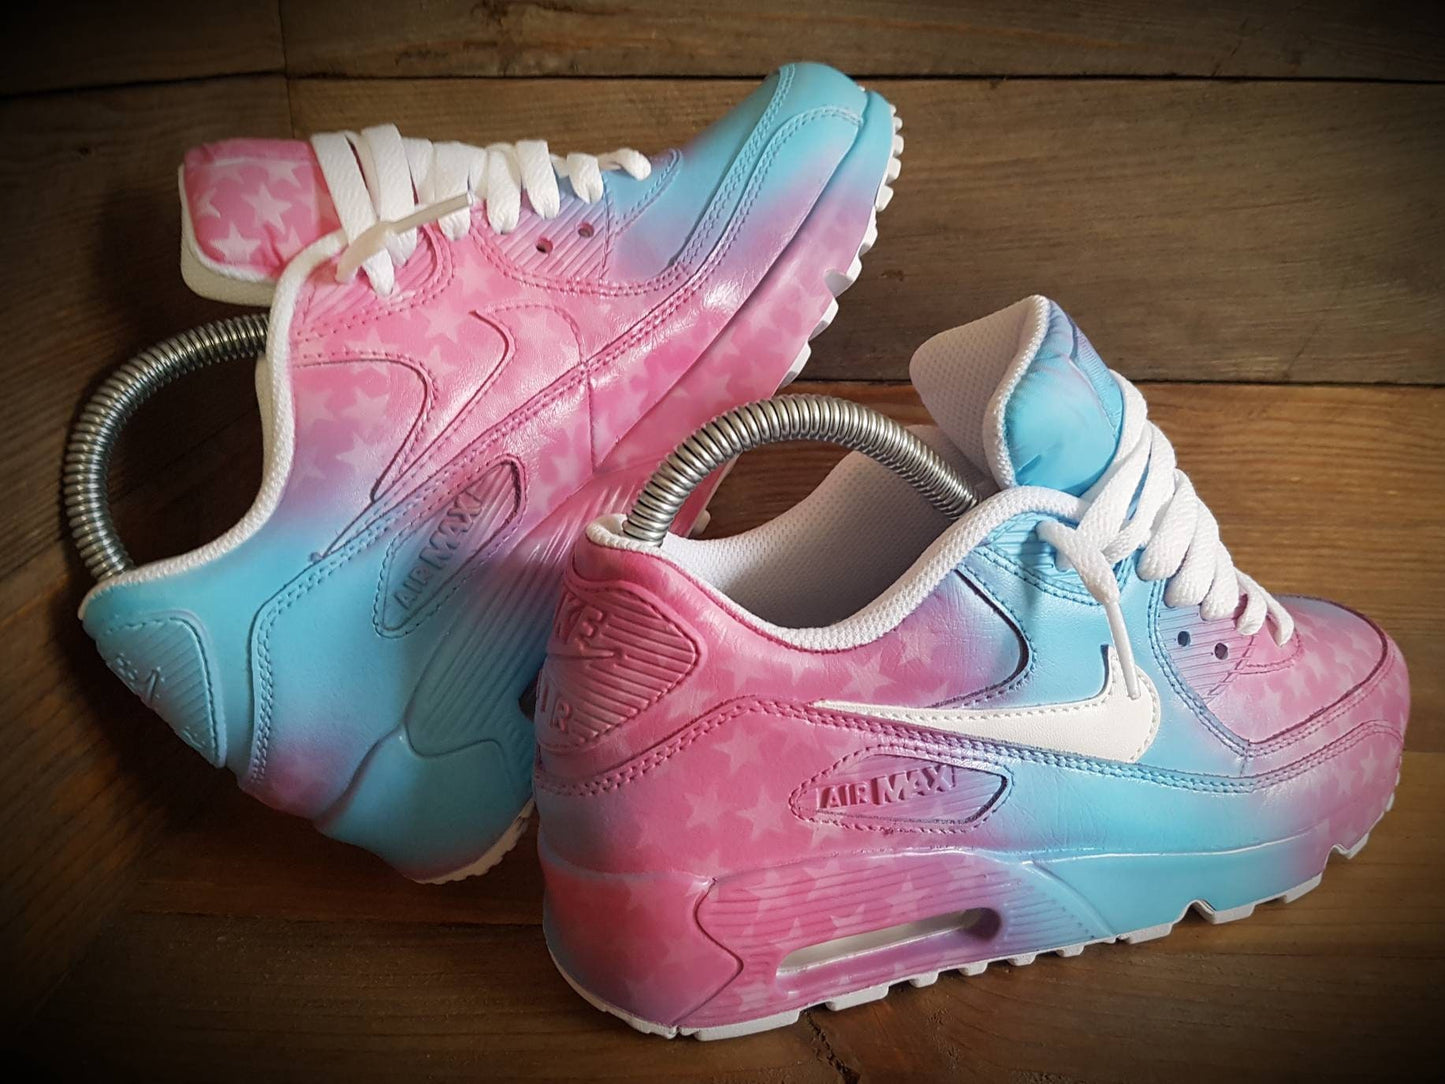 Nike Air Max 90: Pink Blended Stars